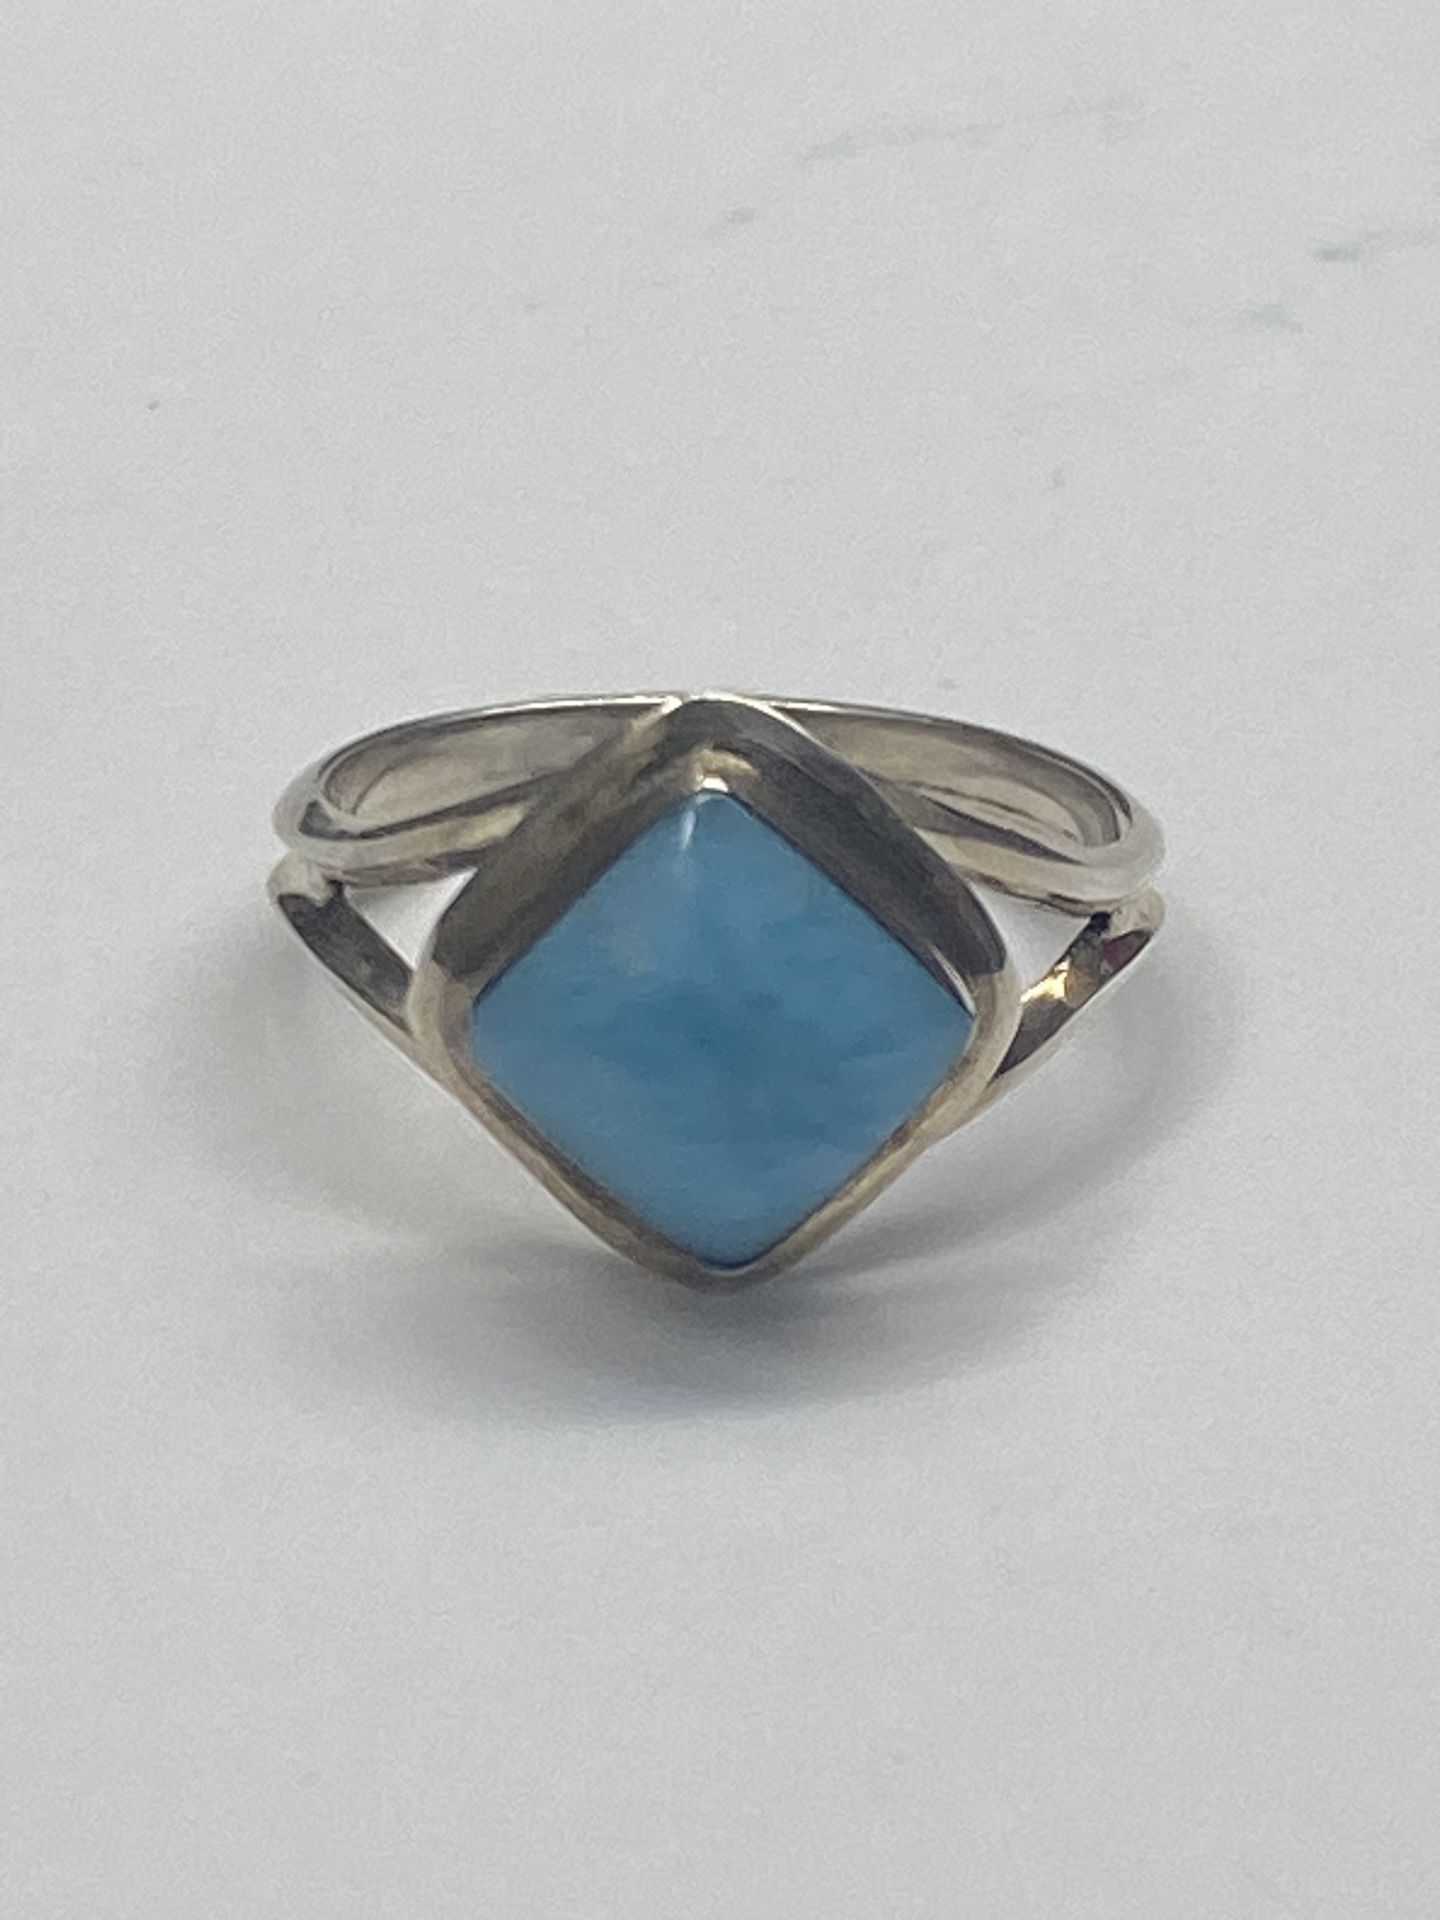 Blue Larimar Sterling Silver Ring Size 6